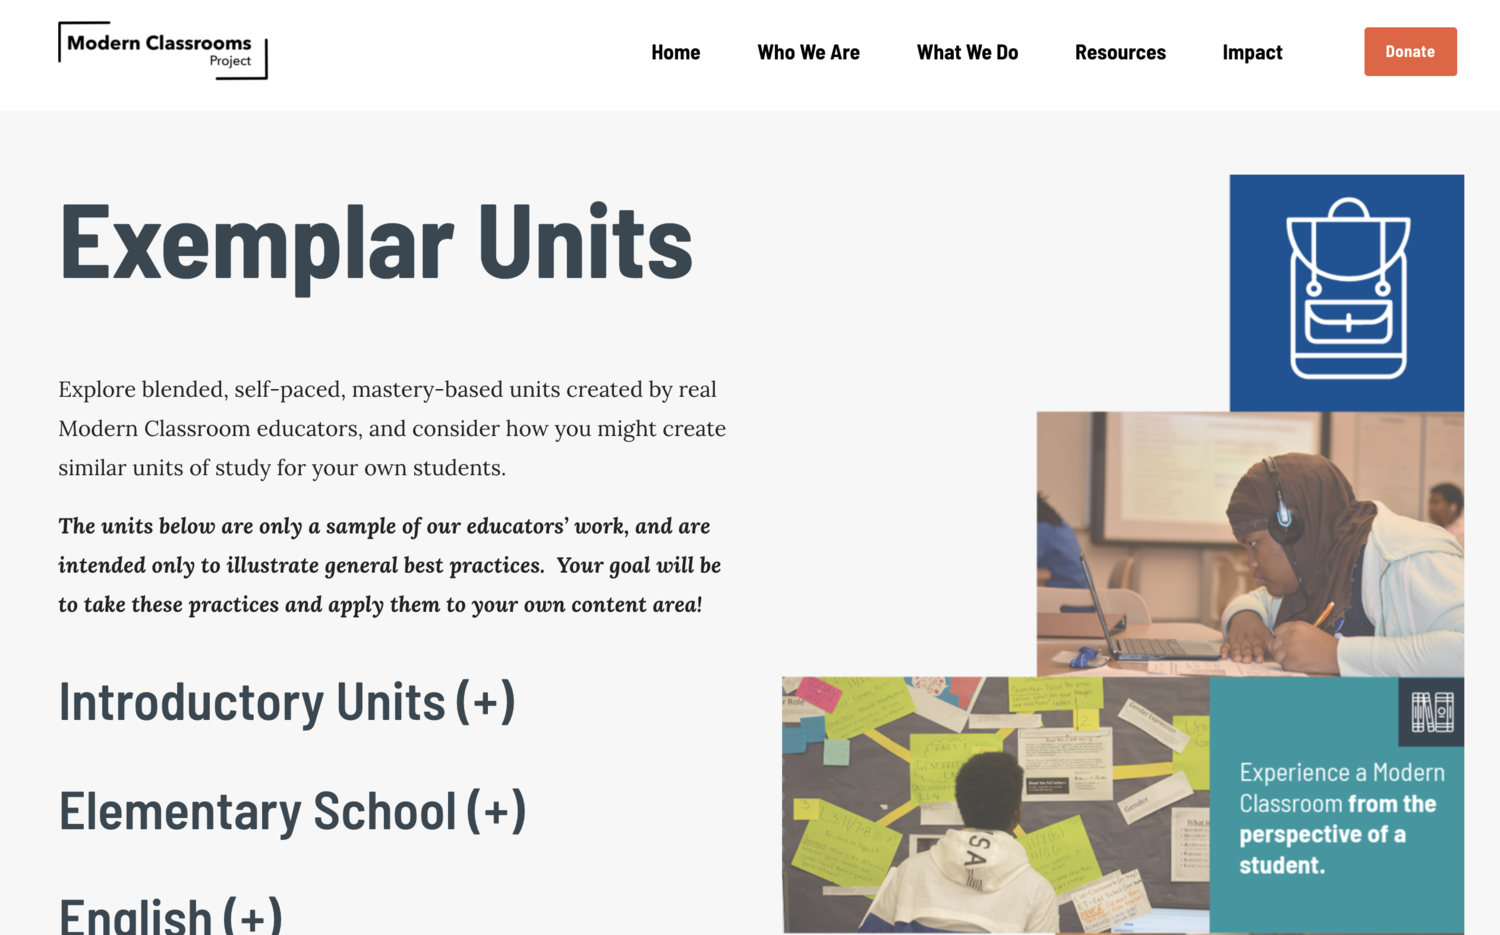 Examples of Modern Classrooms Instructional Units — Modern Classrooms Project